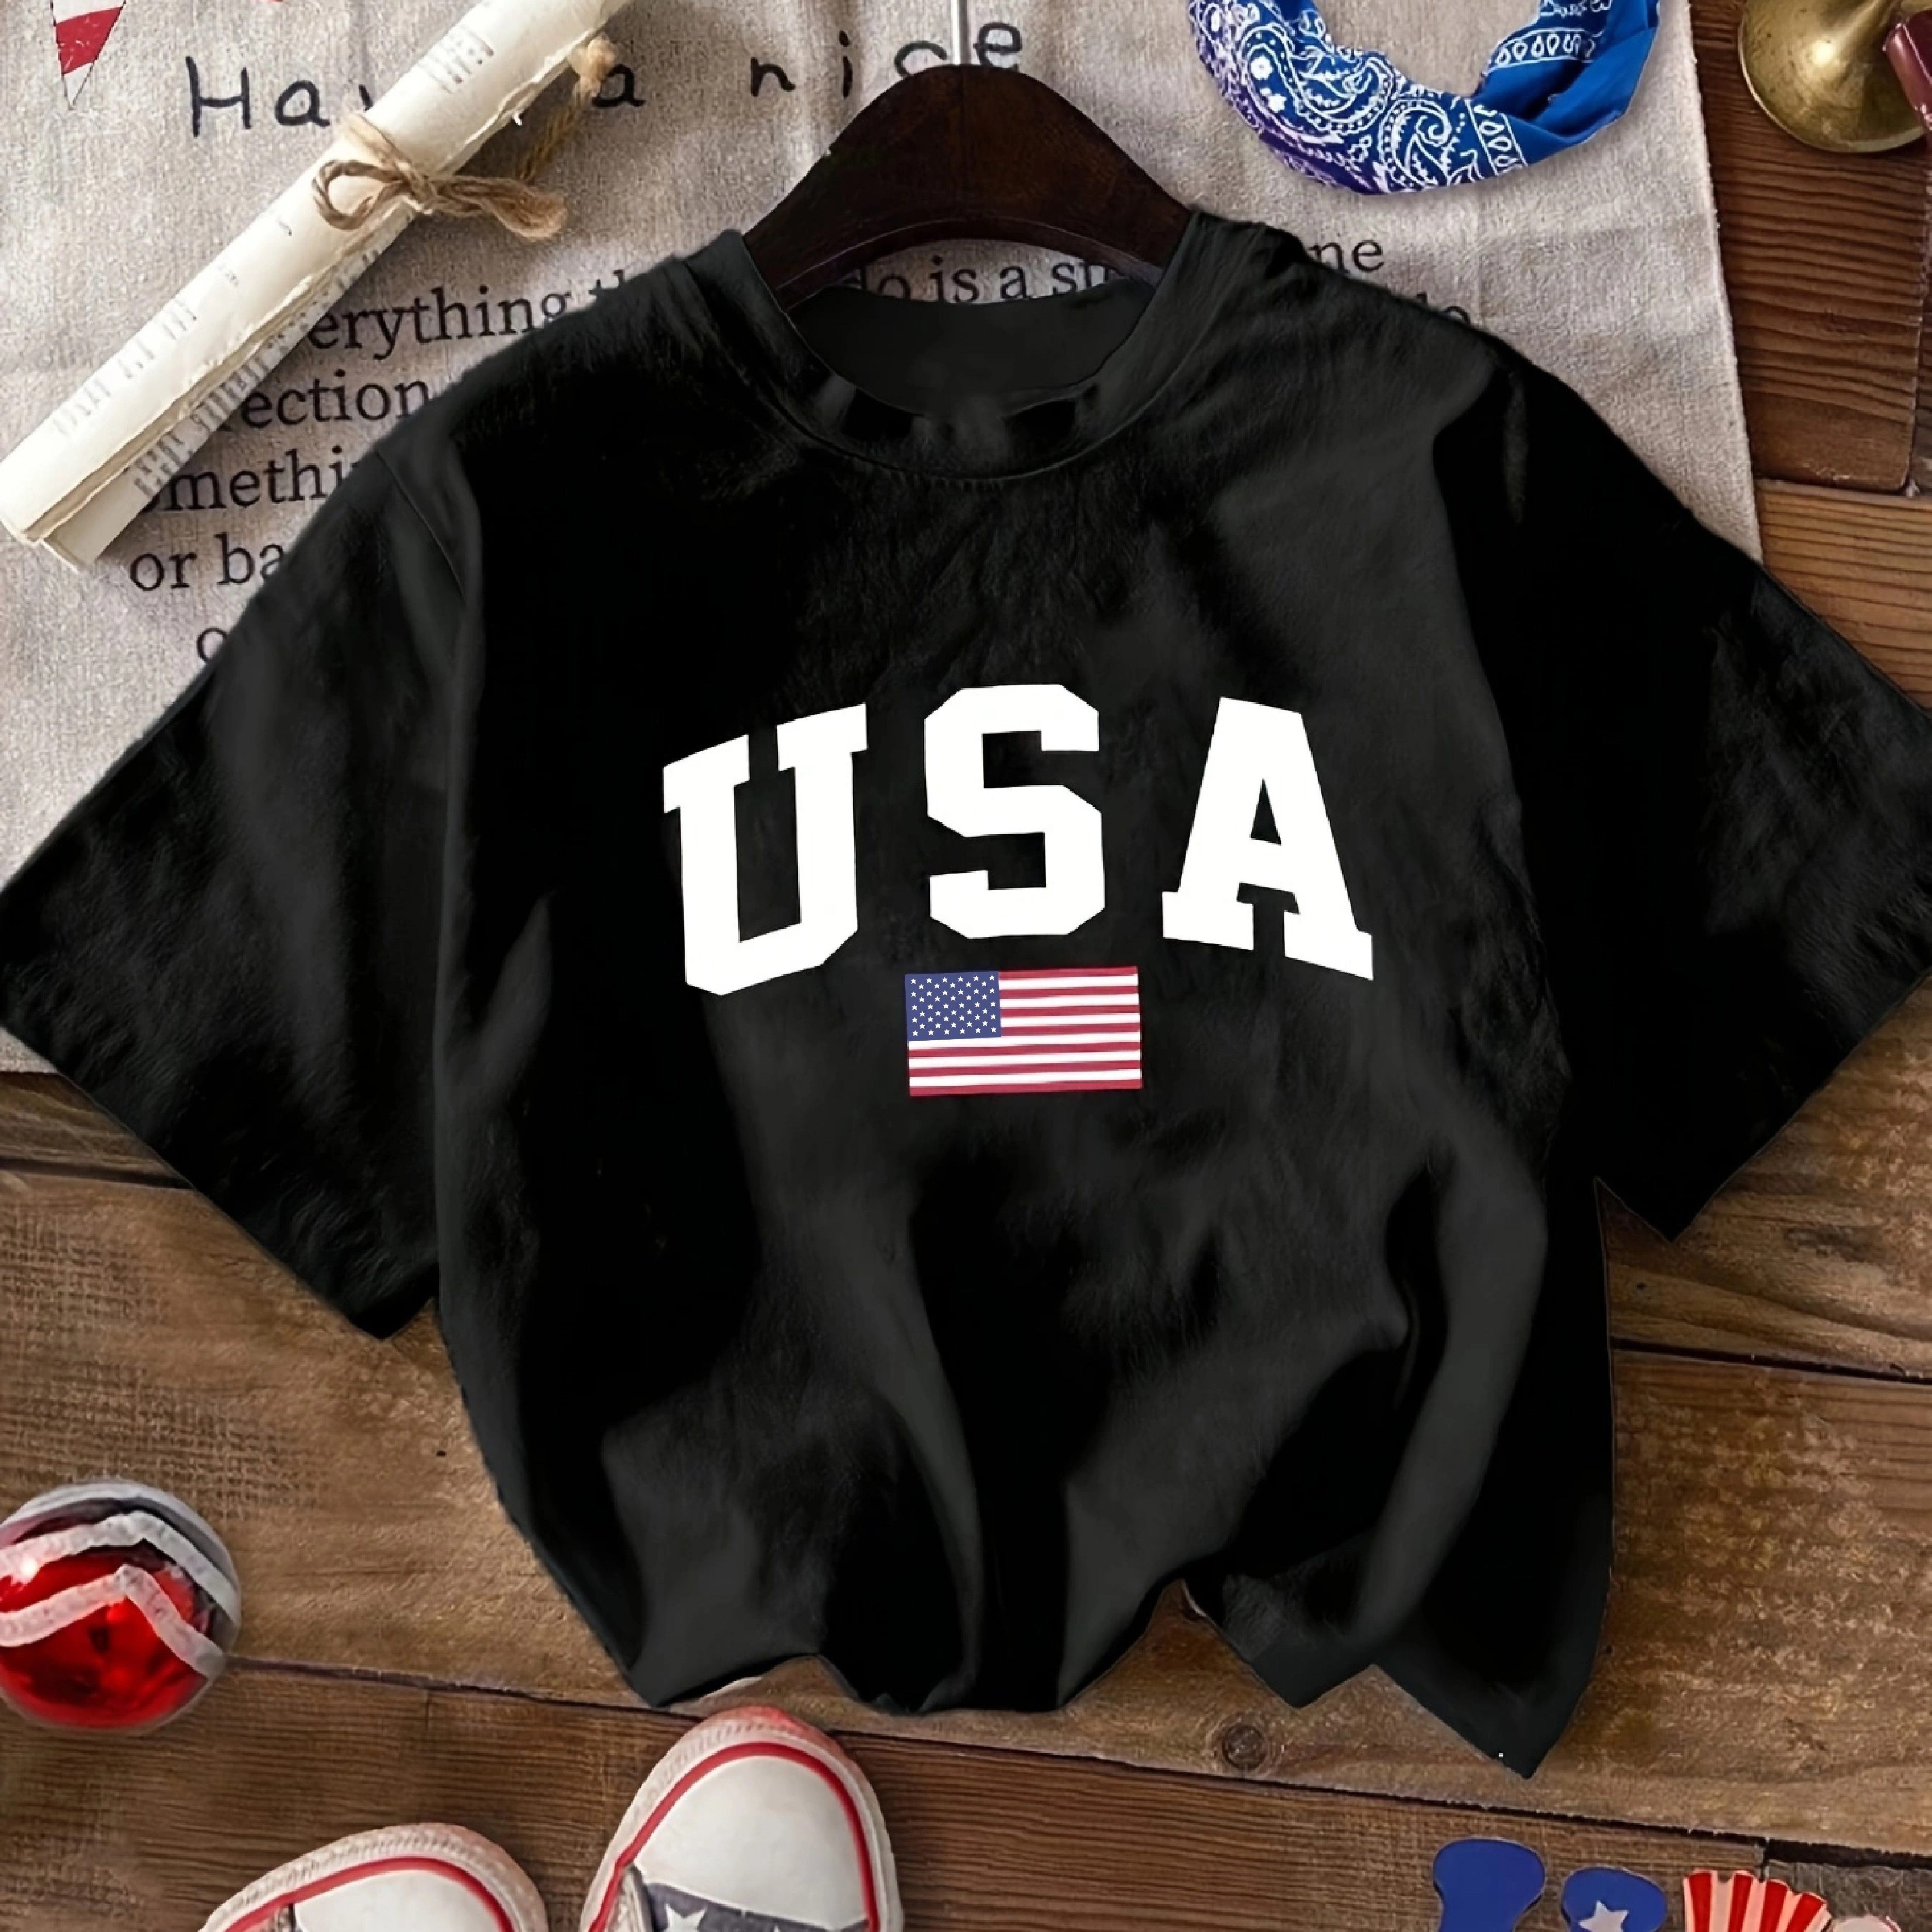 

Letter & American Flag Print T-shirt, Short Sleeve Crew Neck Casual Top For Summer & Spring, Women's Clothing